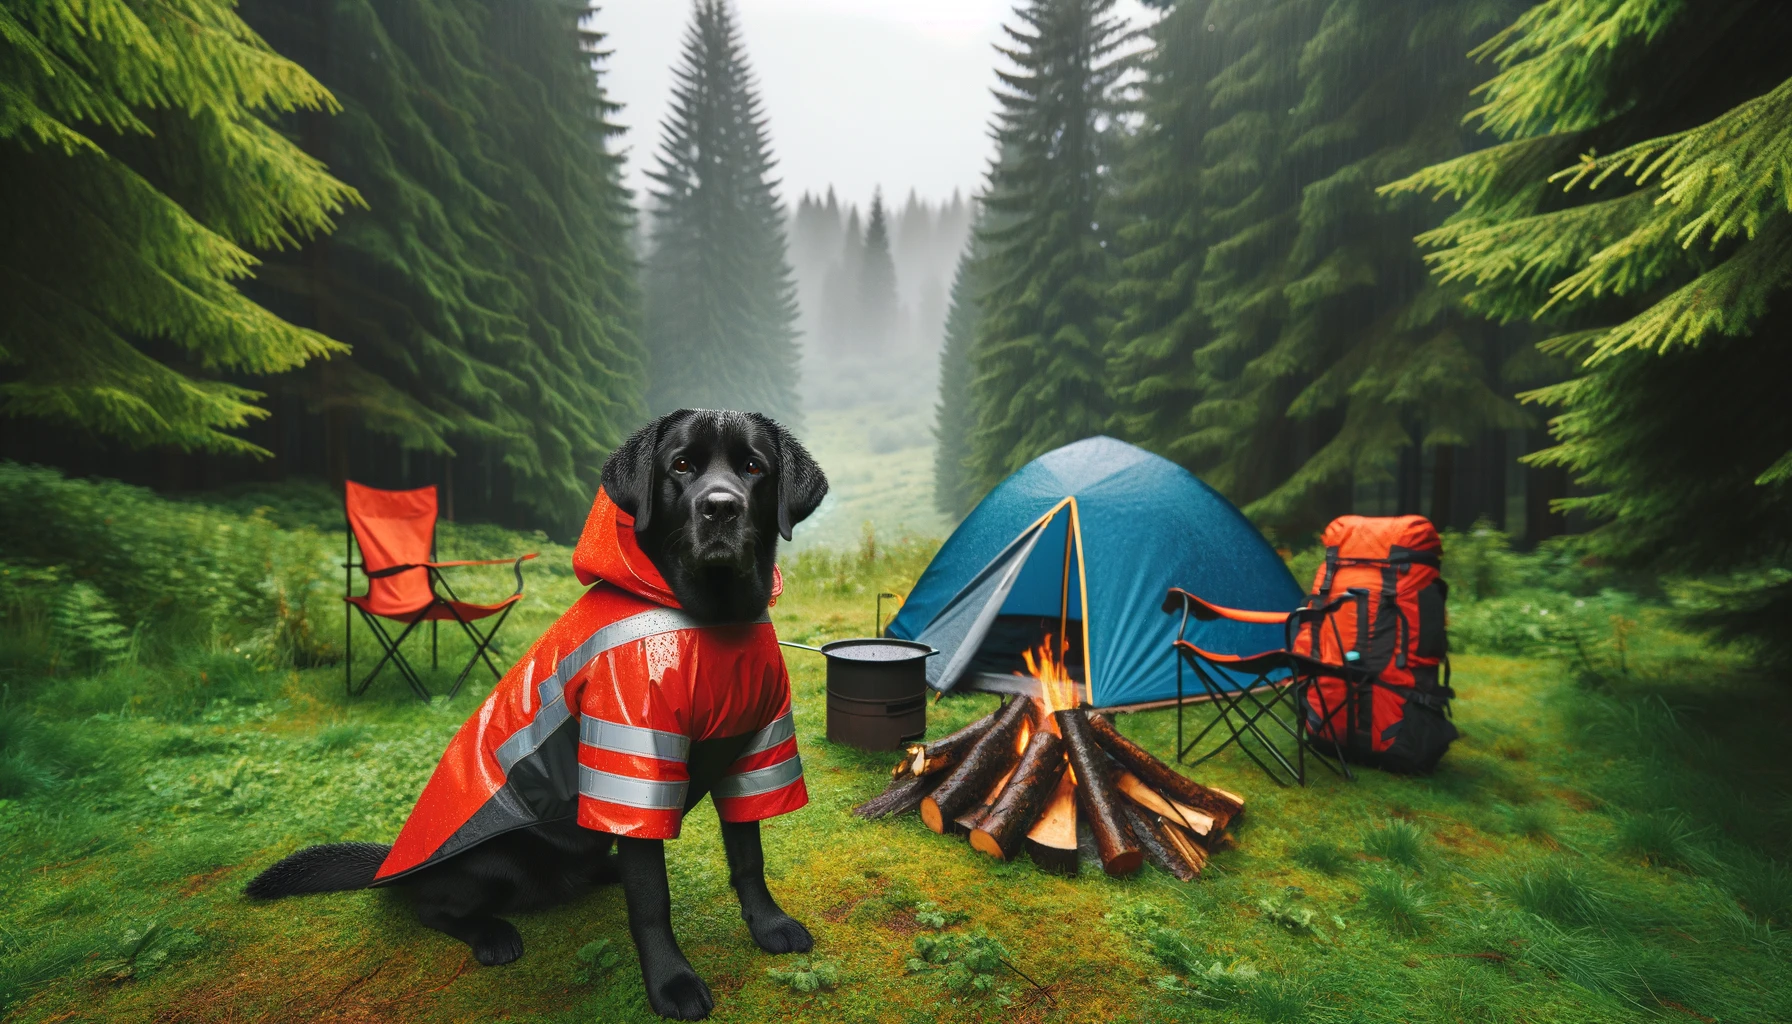 Dog Raincoat for Camping Trips